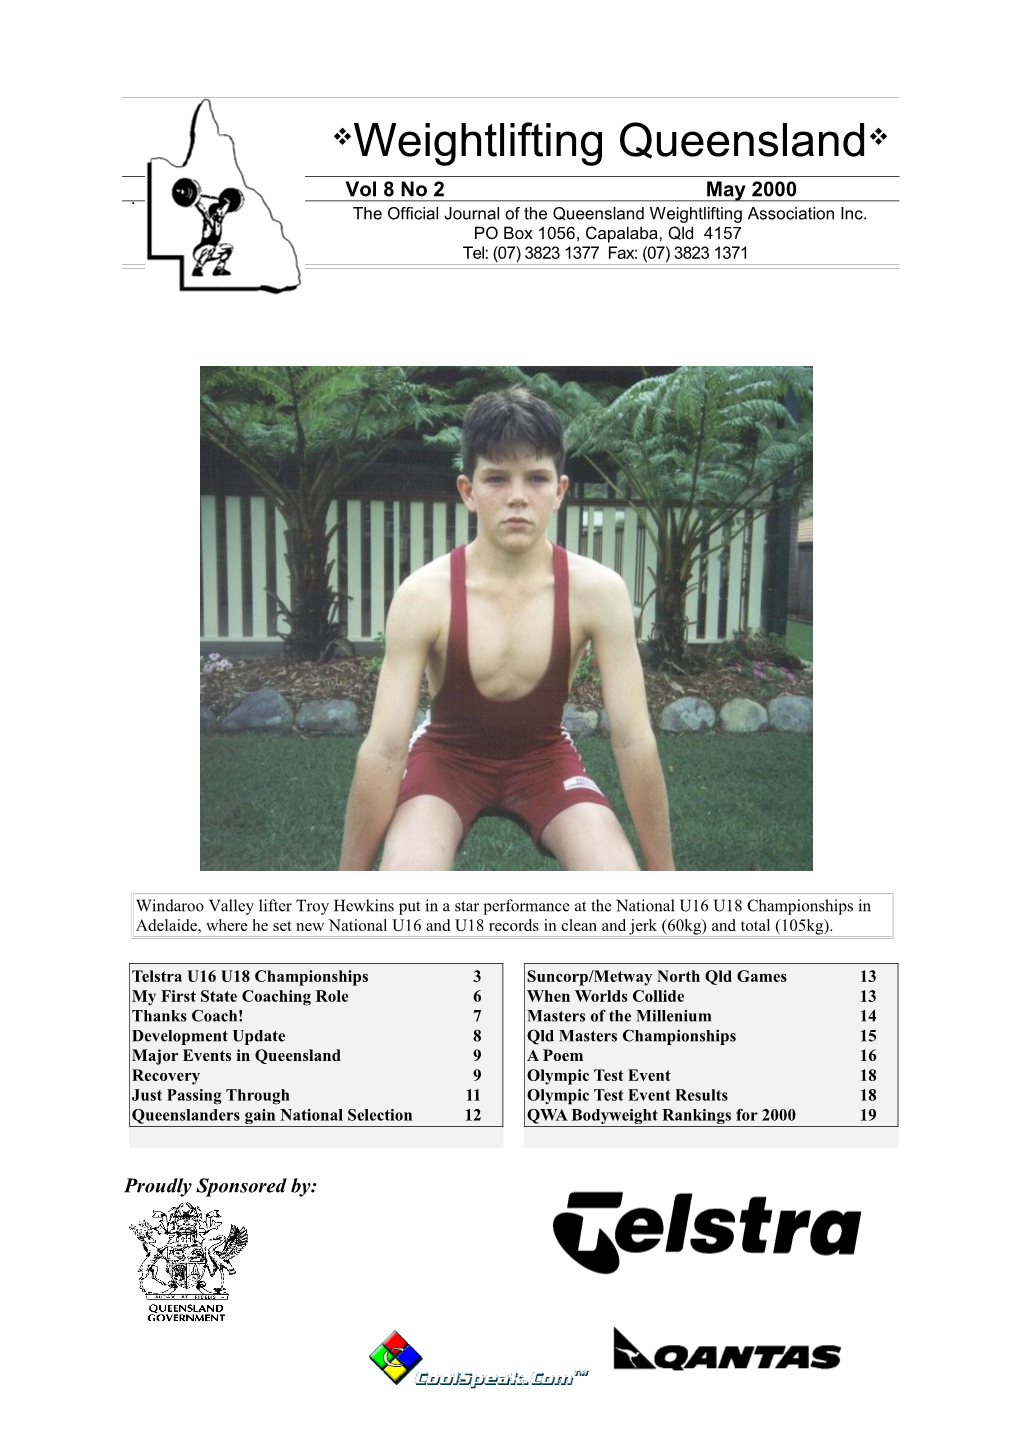 The Official Journal of the Queensland Weightlifting Association Inc